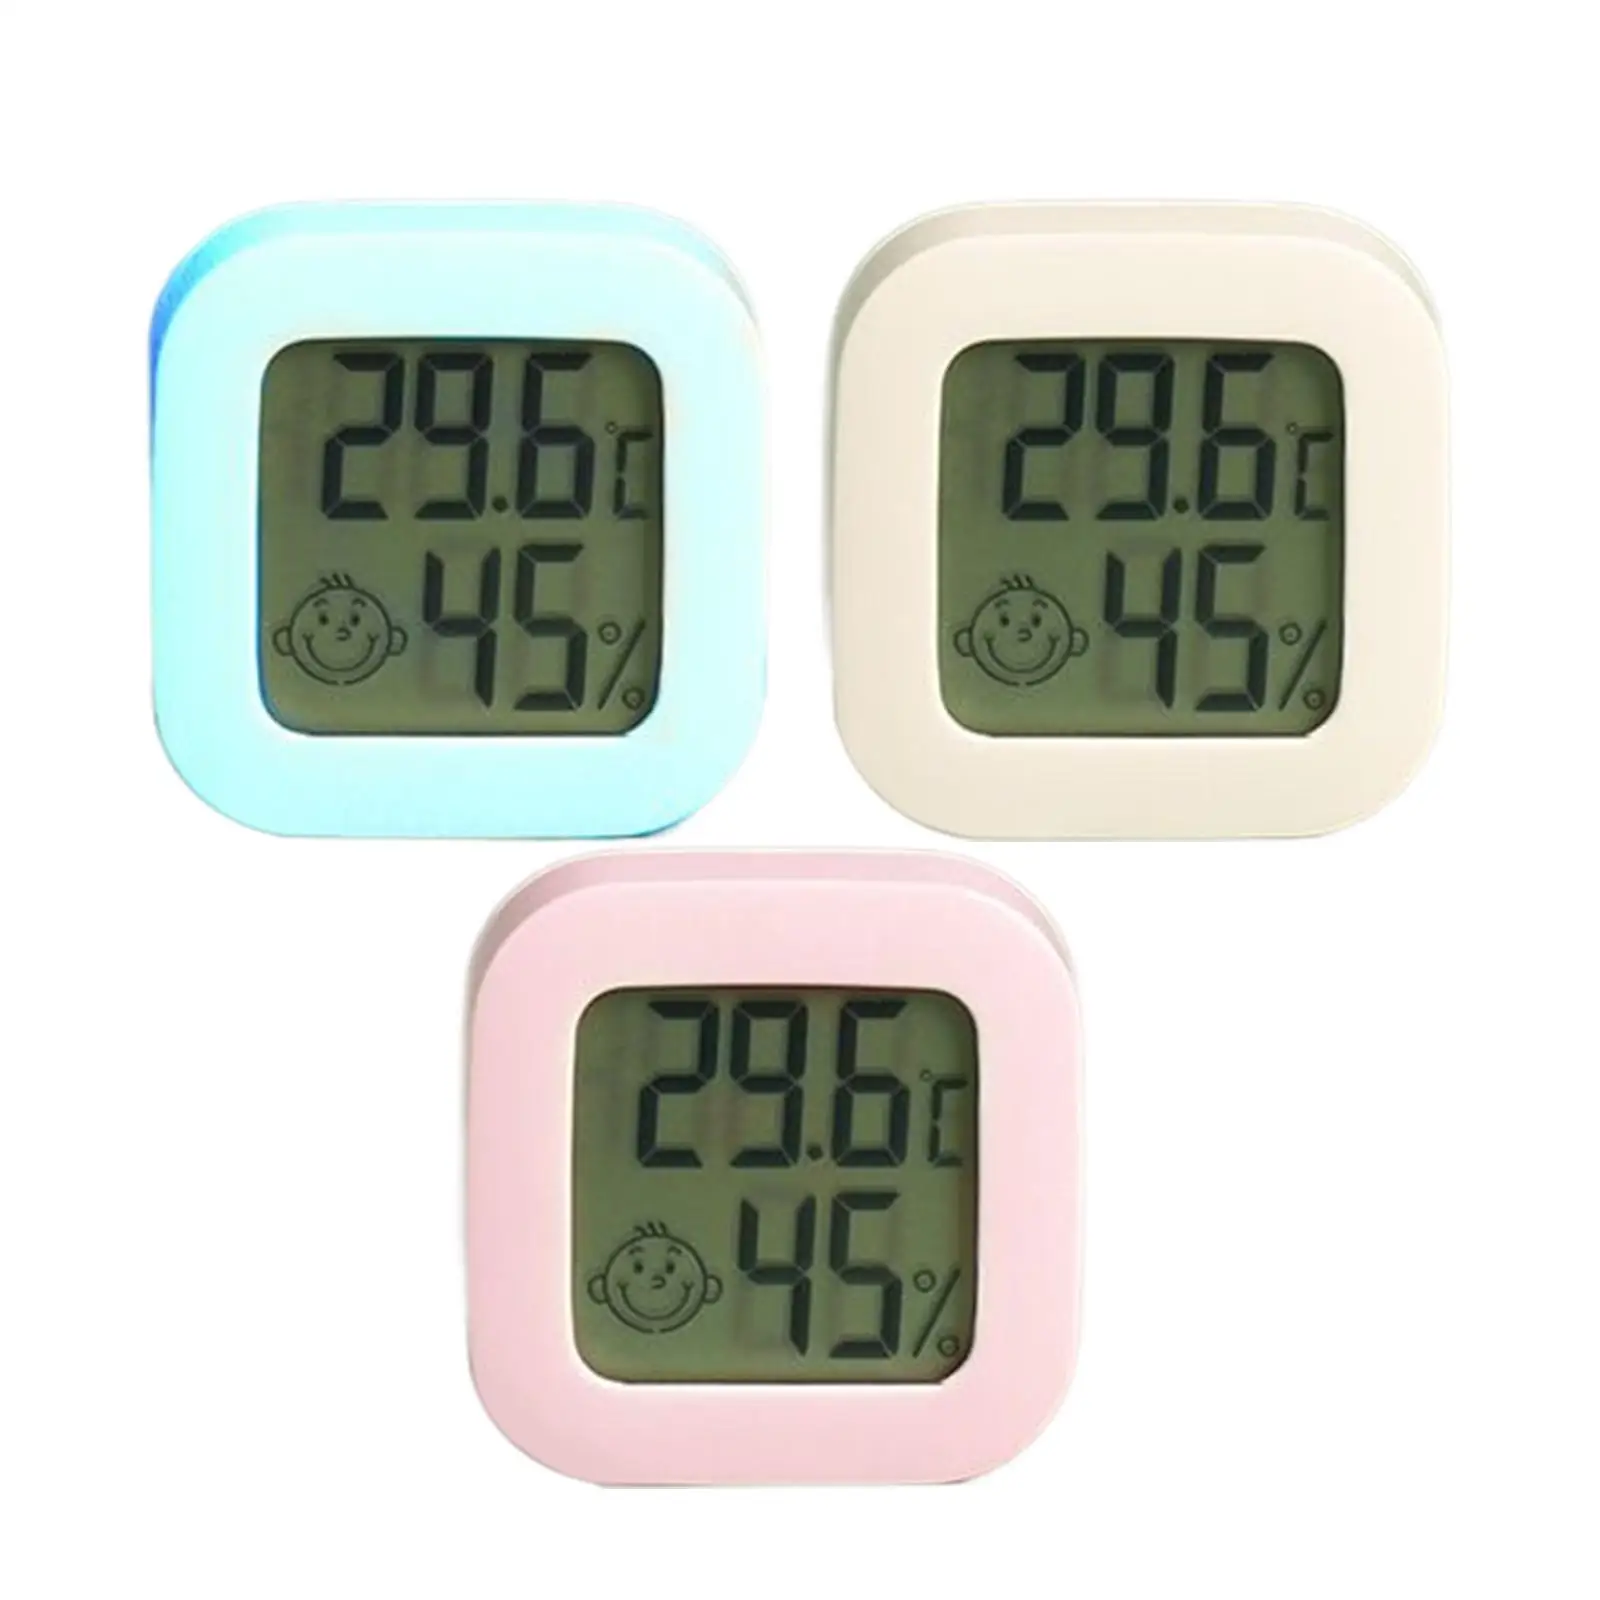 Thermoer Widly Usage Humidity Temperature Monitor for Garden Bedroom Indoor